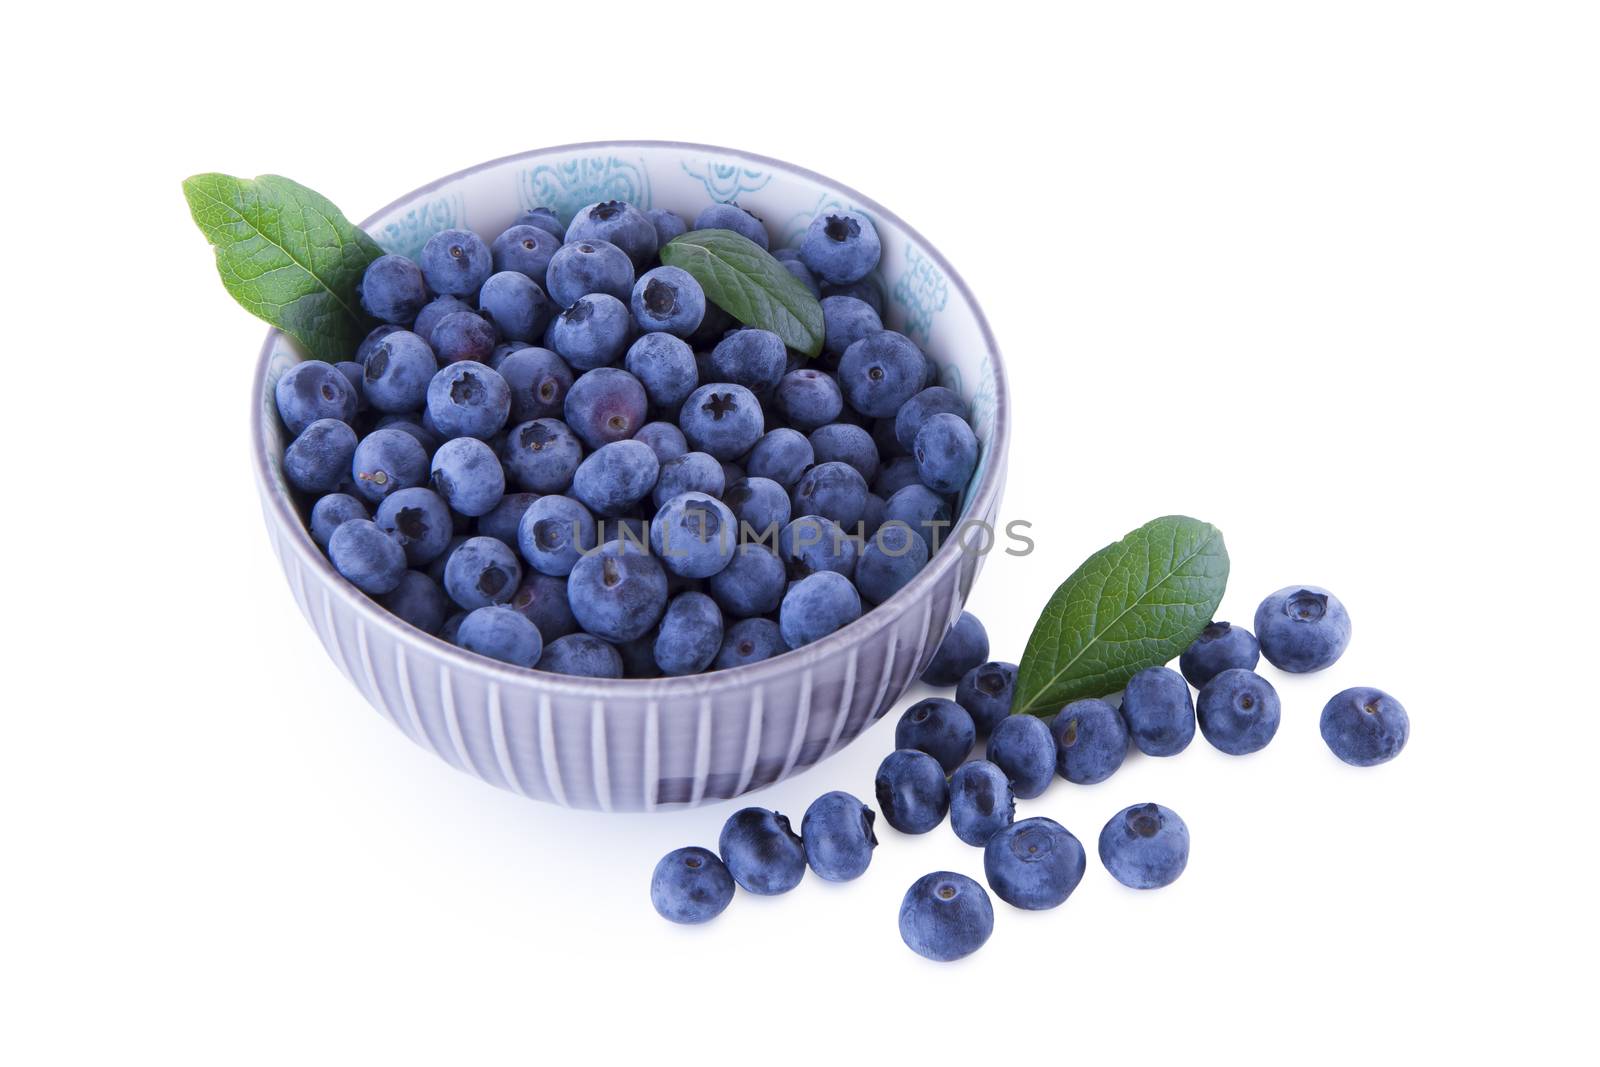 Blueberries in a bowl isolated by Gbuglok